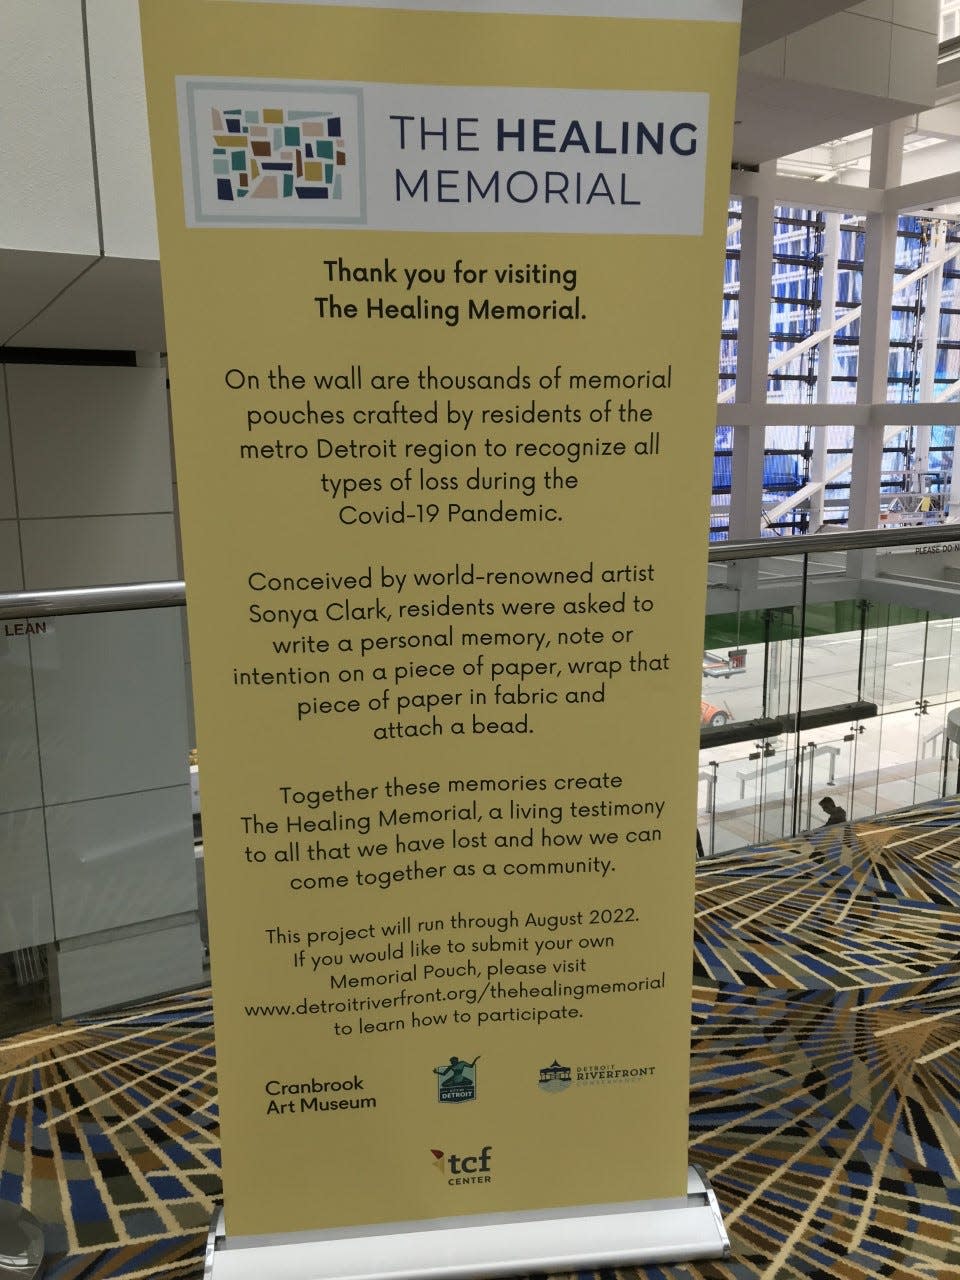 An informational sign about The Healing Memorial, which contains thousands of pouches created by metro Detroiters to recognize loss during the COVID-19 pandemic, in October 2022. The memorial will be moving from inside Huntington Place in downtown Detroit to the Cranbrook Art Museum in Bloomfield Hills.